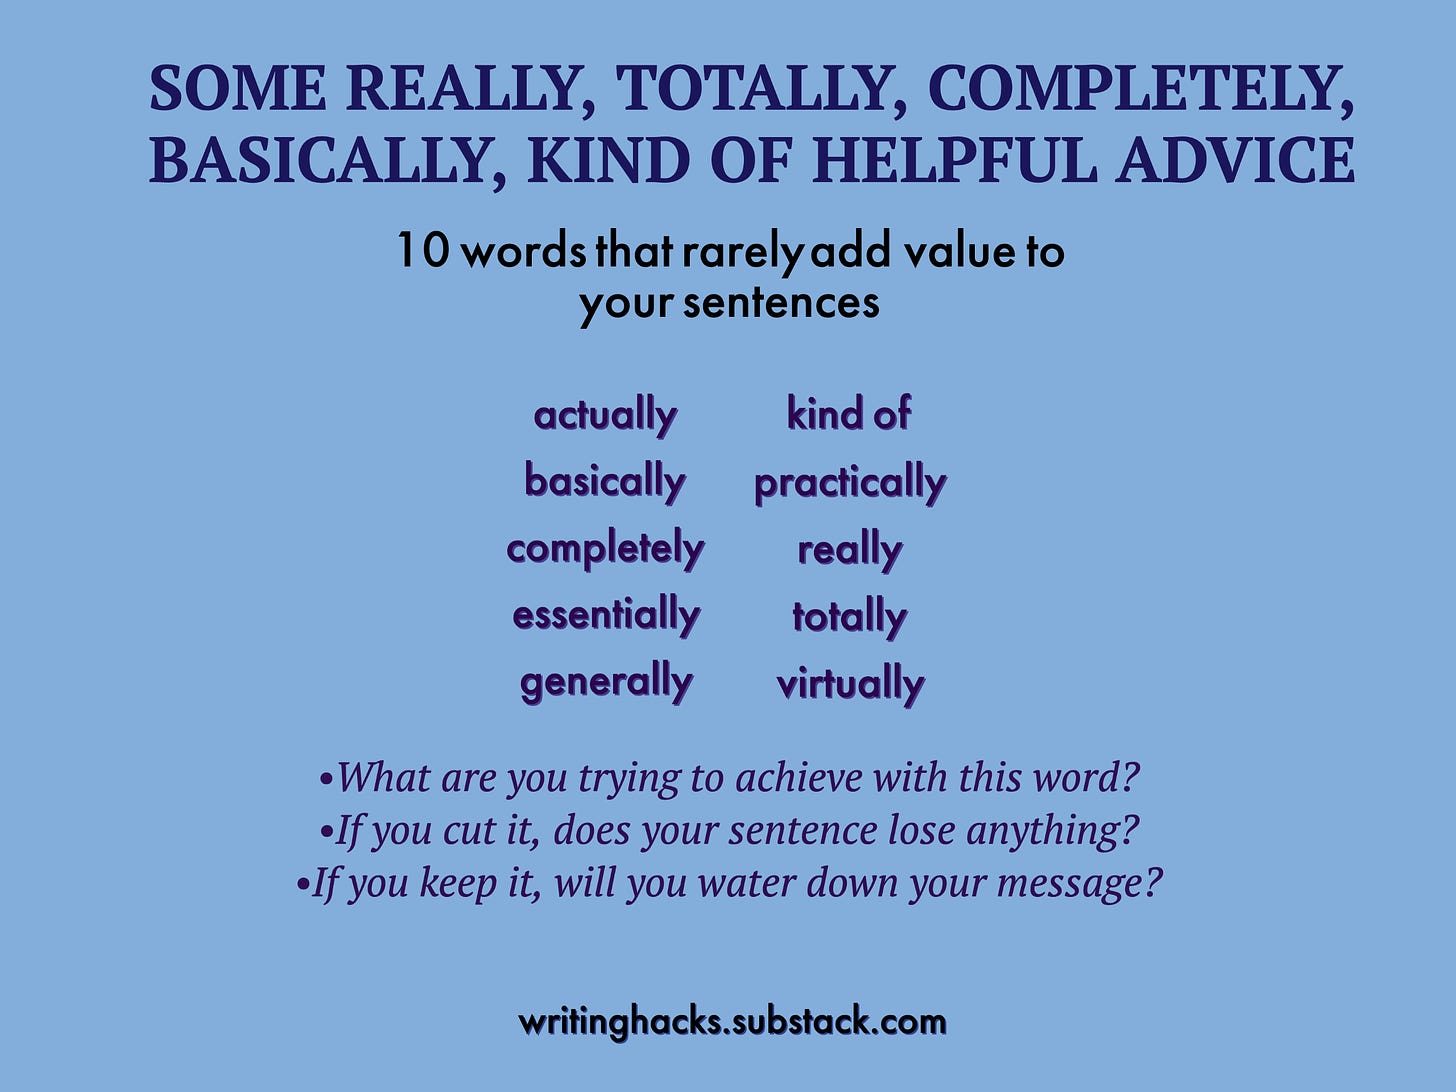 10 words that rarely add value to your sentences: actually, basically, completely, essentially, generally, kind of, practically, really, totally, virtually: Before you use these words, ask what you are trying to achieve. If you cut it, does your sentence lose anything. If you keep it, do you water down your message?